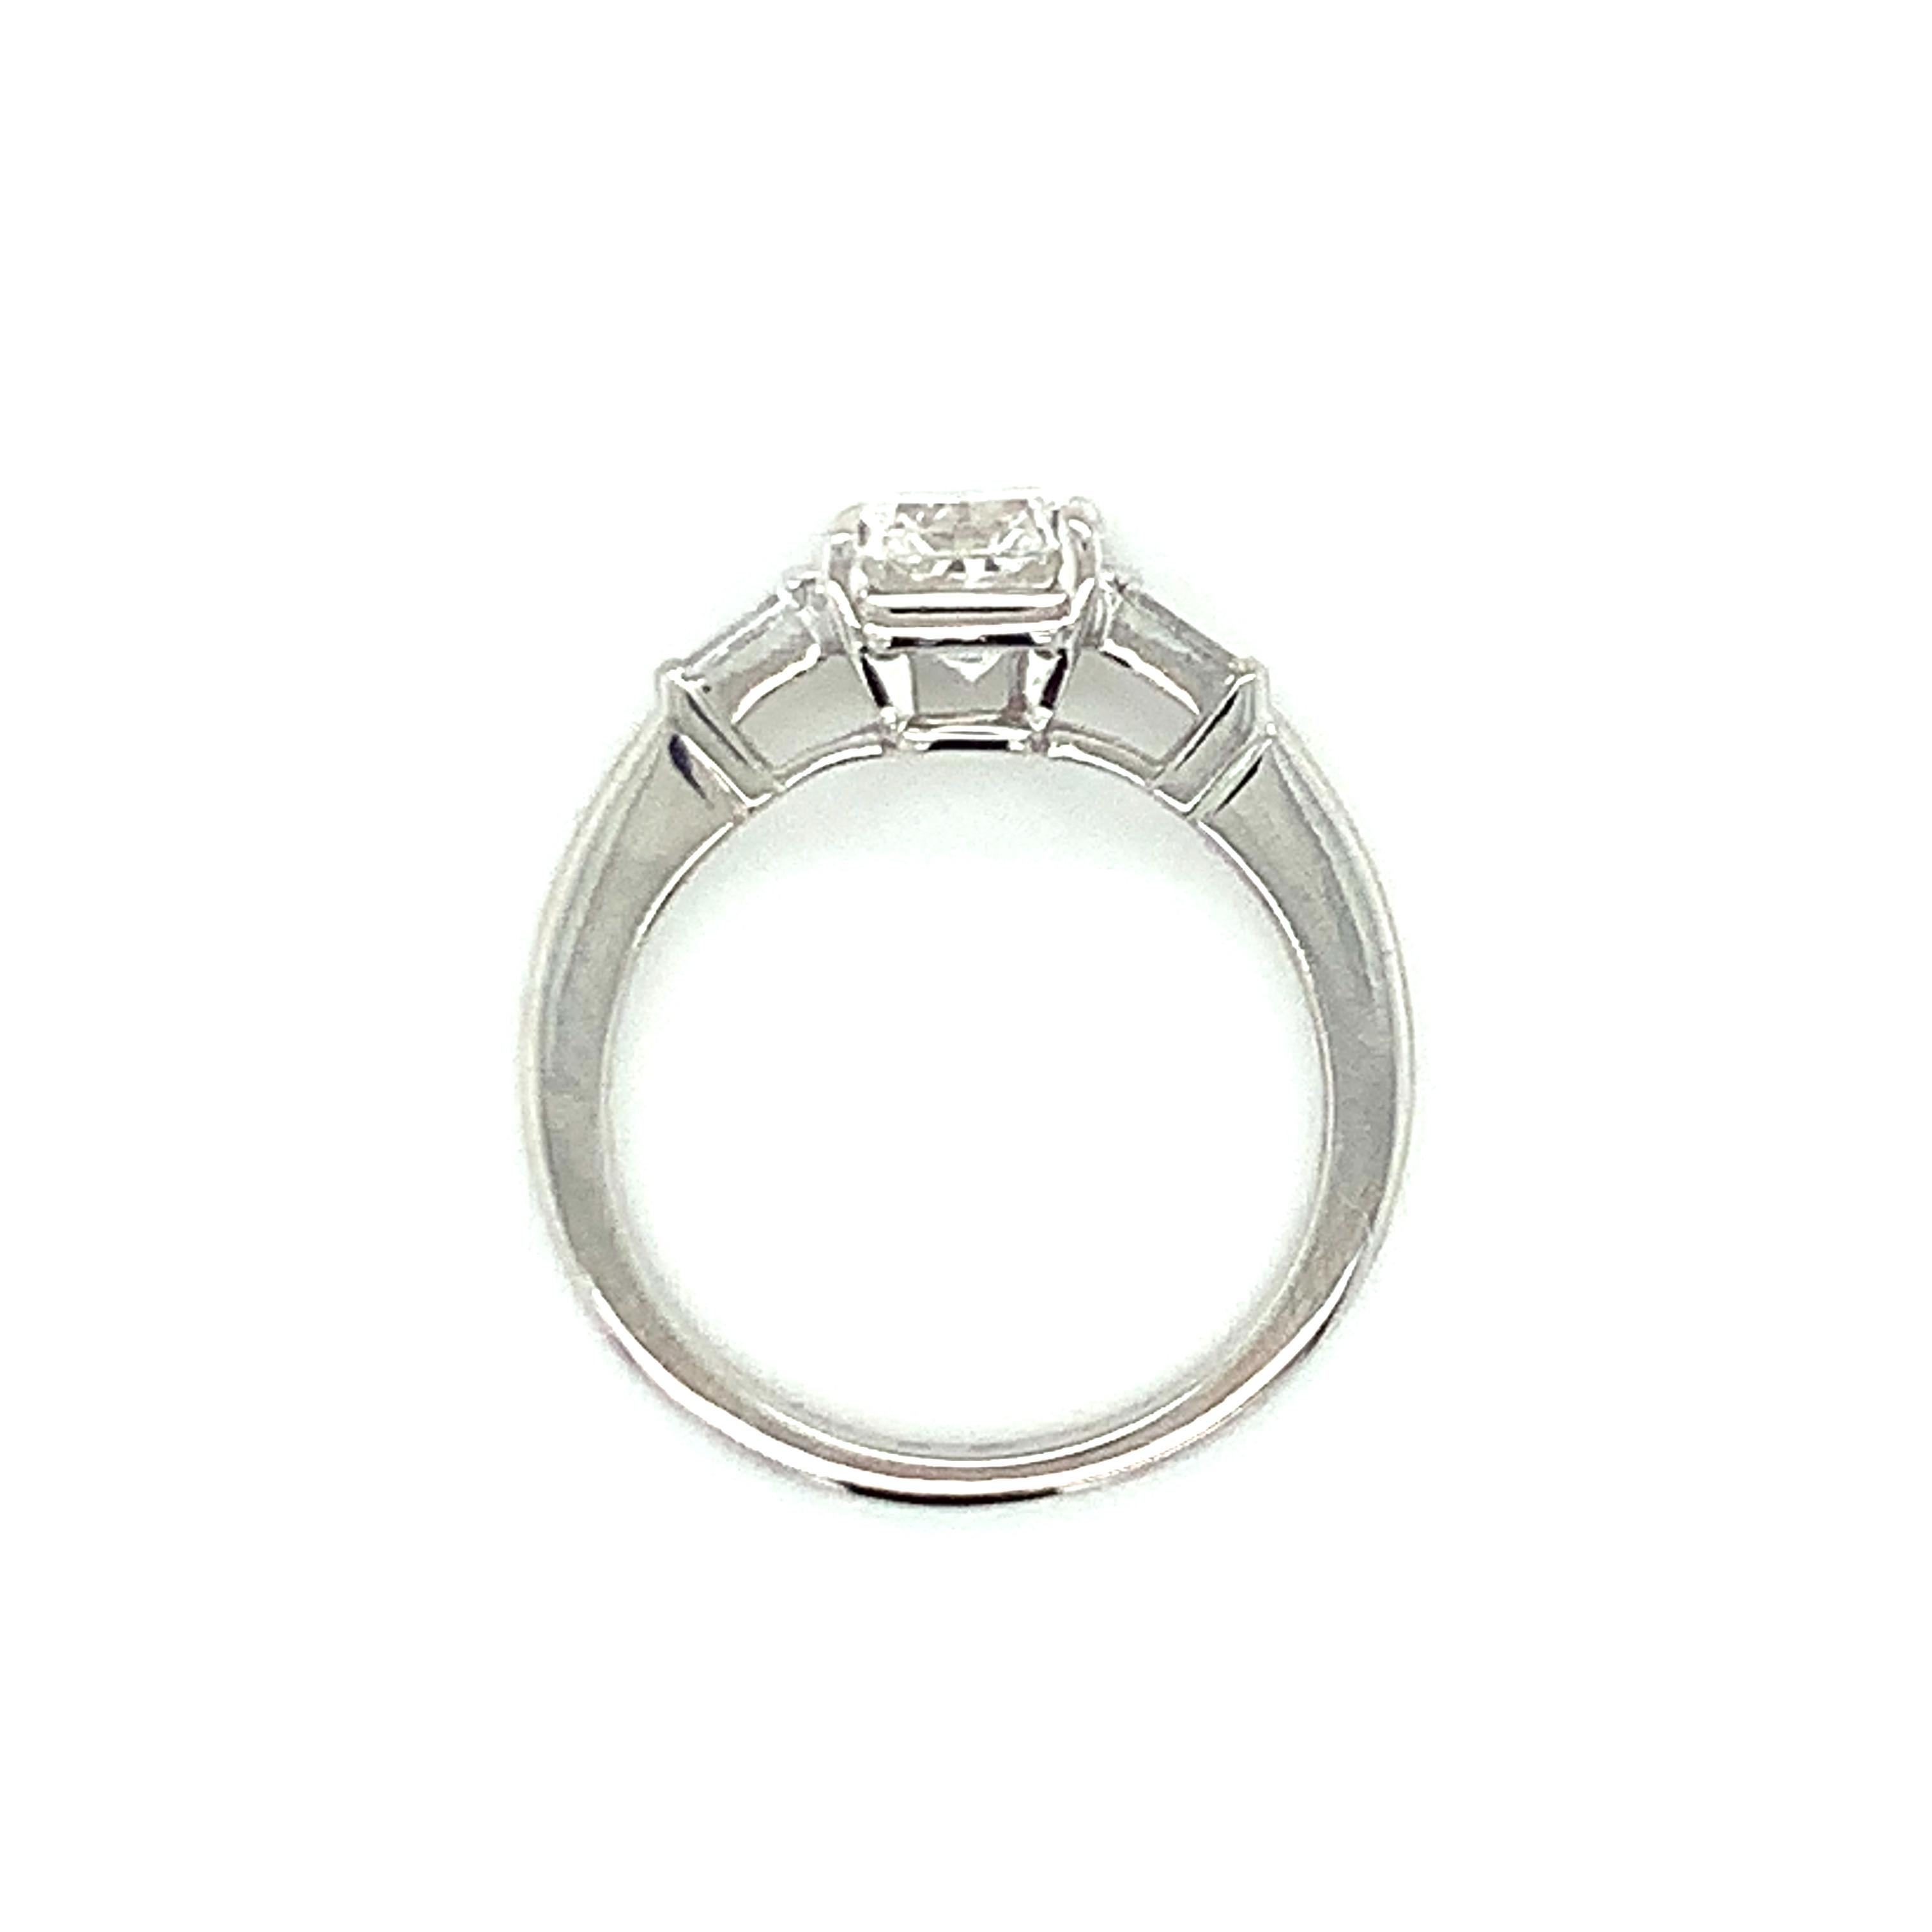 GIA Certified 1.03 Carat Diamond Platinum Engagement Ring by Tiffany & Co. In Excellent Condition For Sale In Beverly Hills, CA